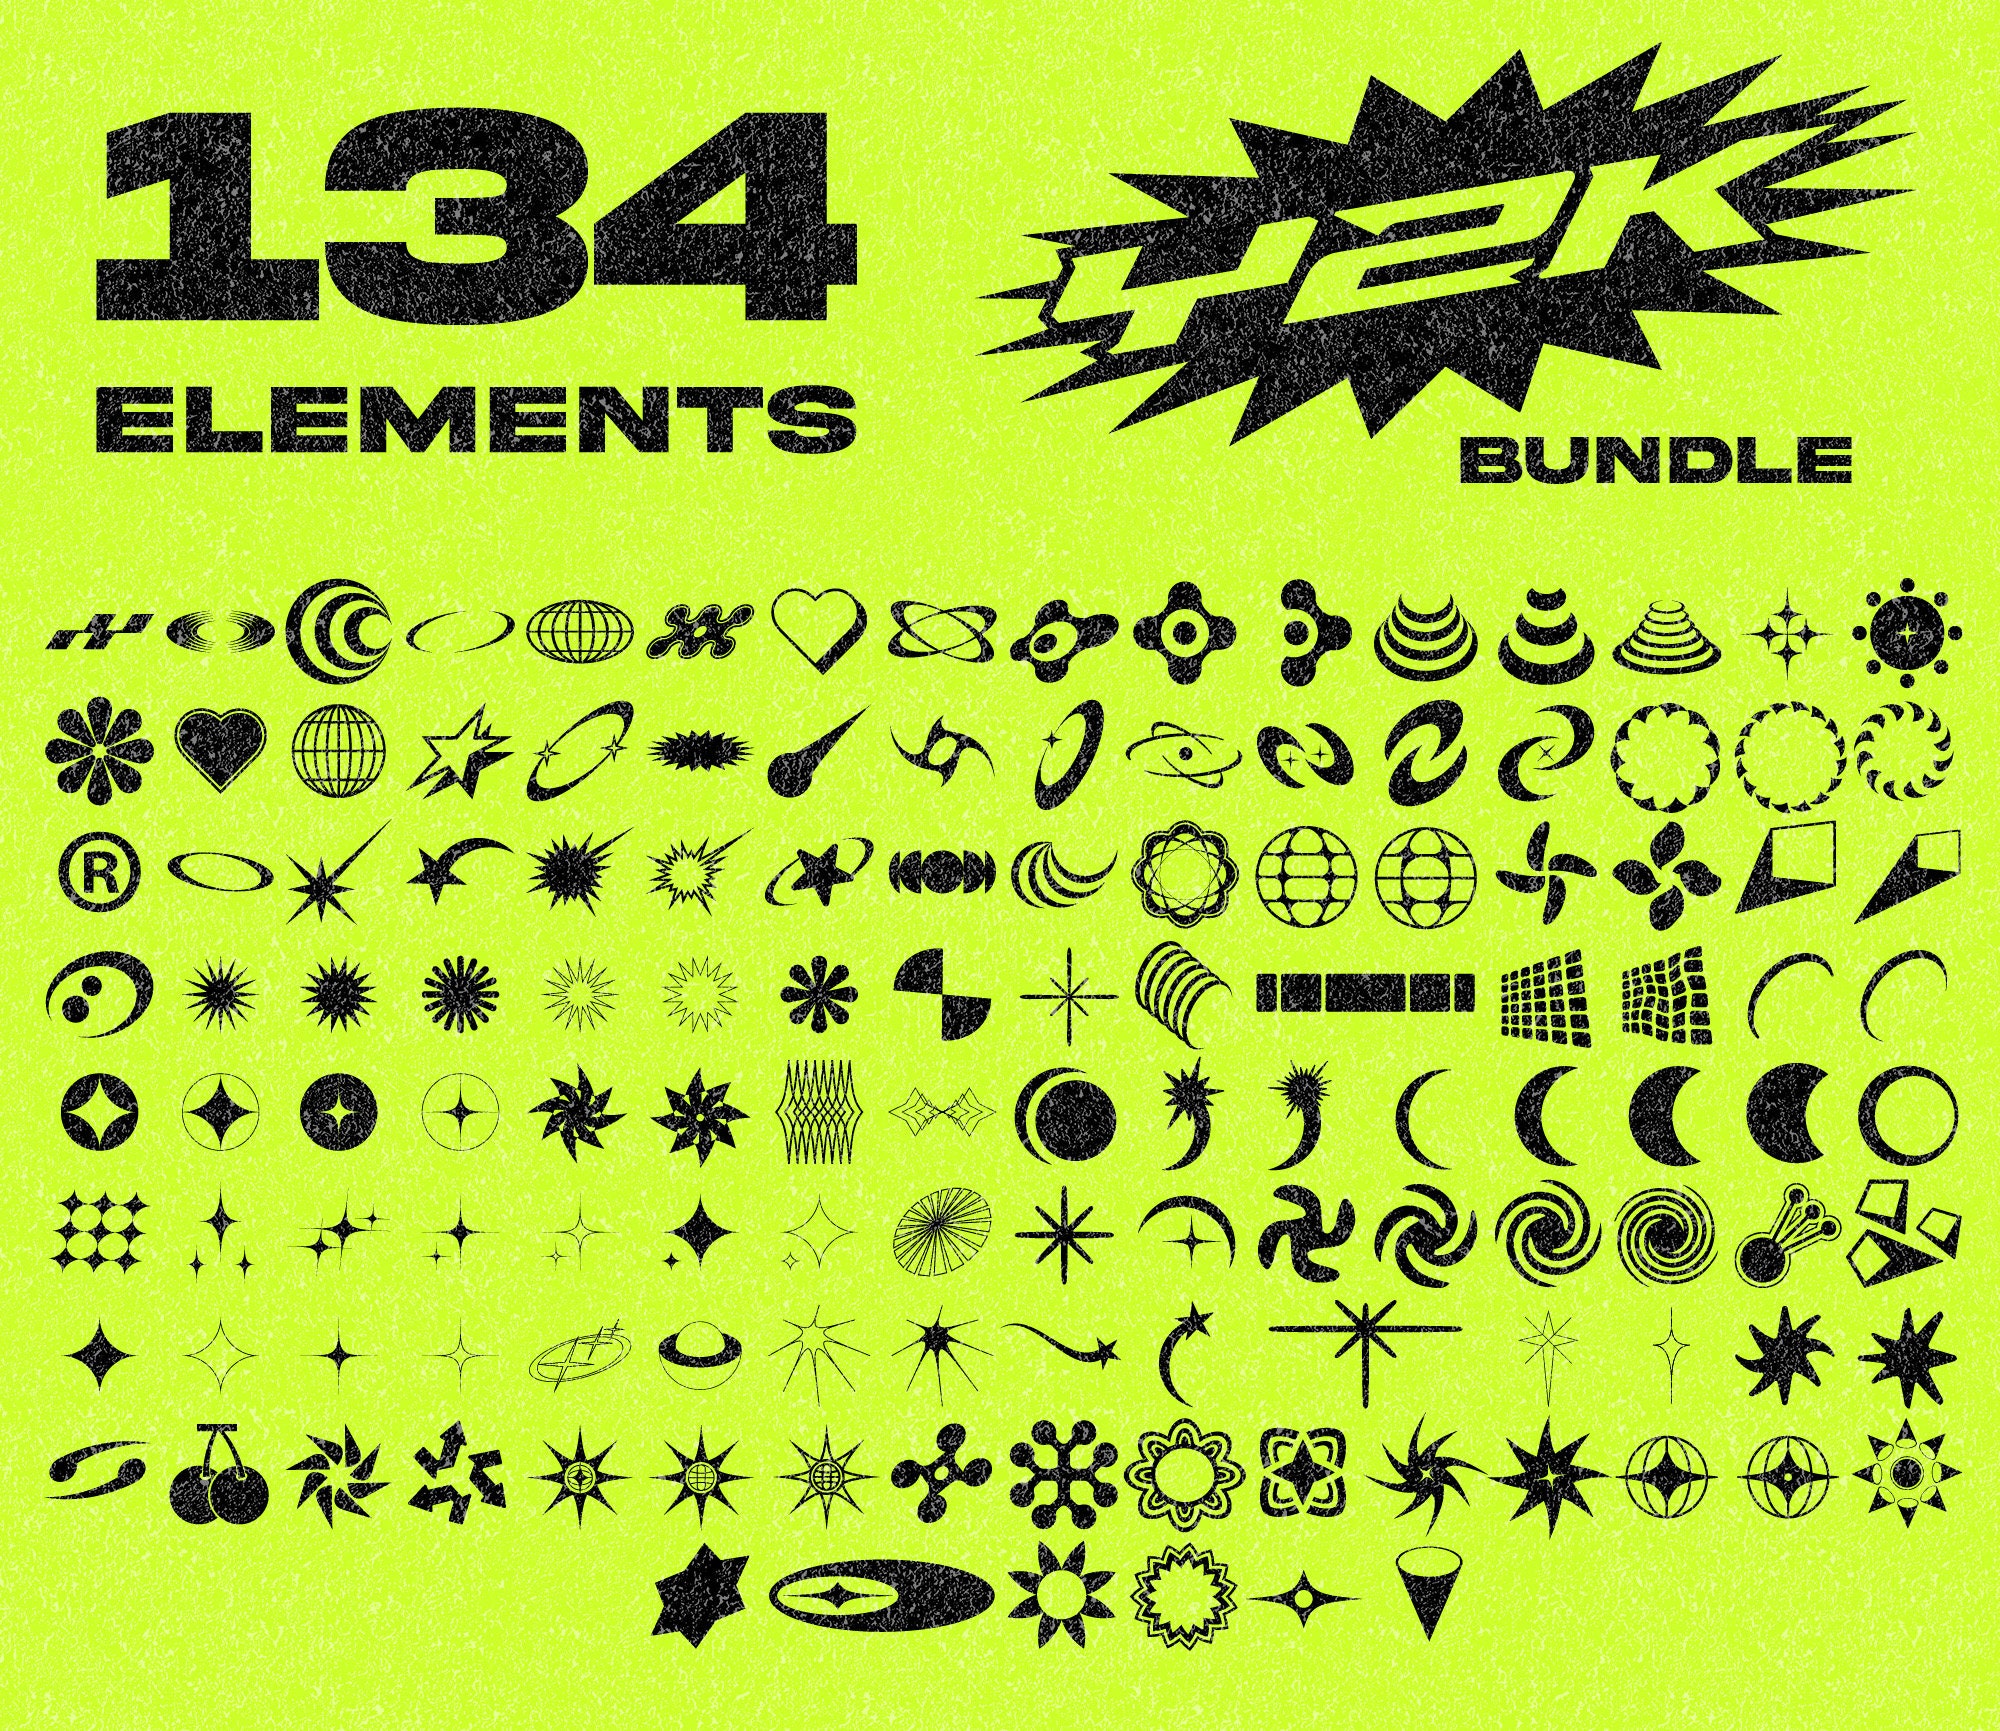 Y2K Aesthetic Icons Template over 80 Assets for Logos -  Israel